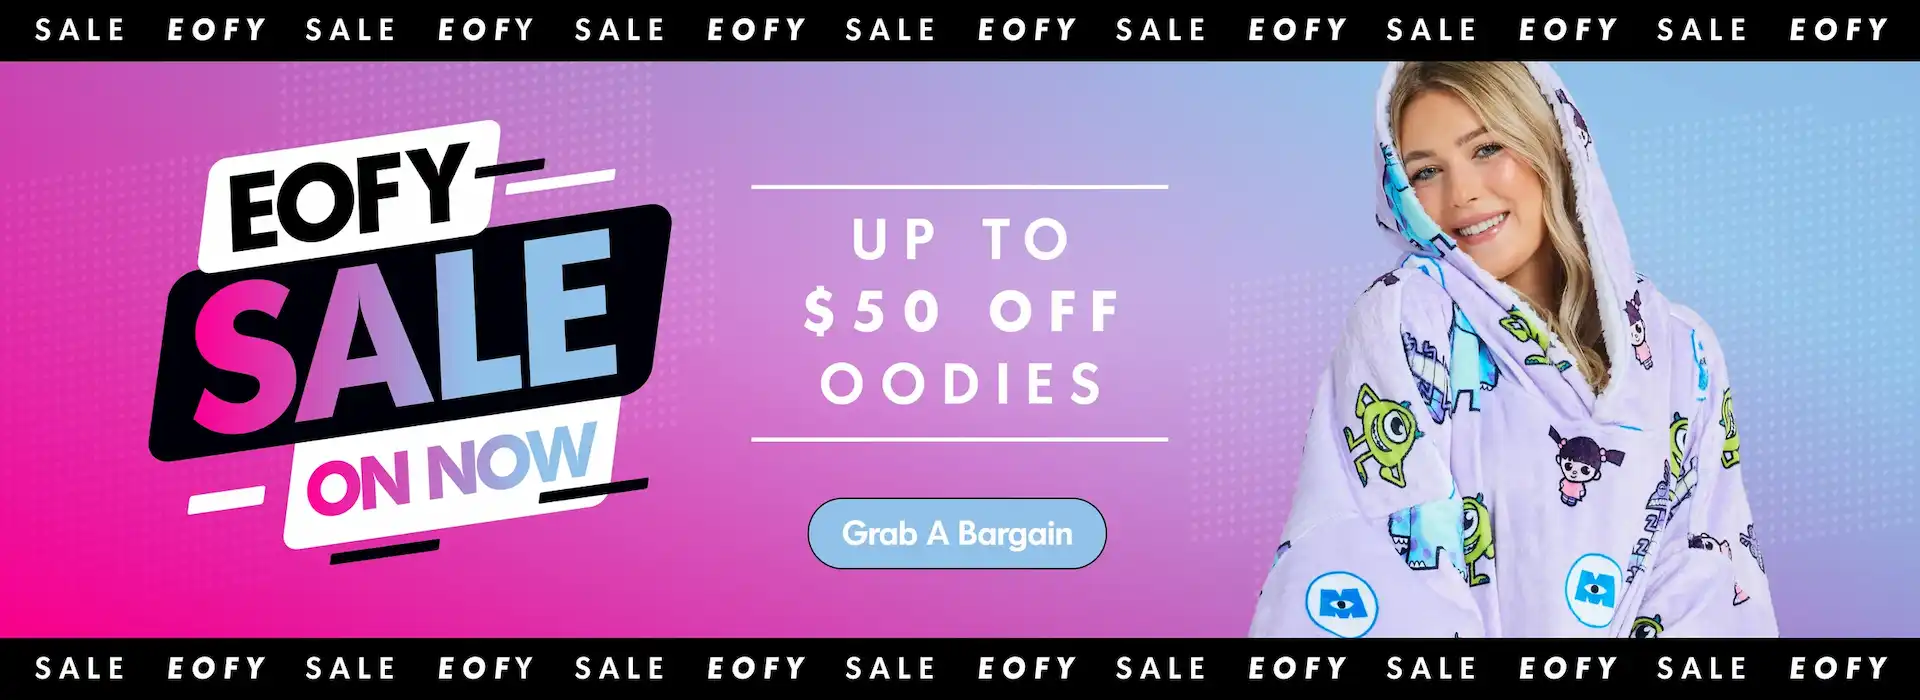 Save up to $50 OFF Oodies with coupon at EOFY sale